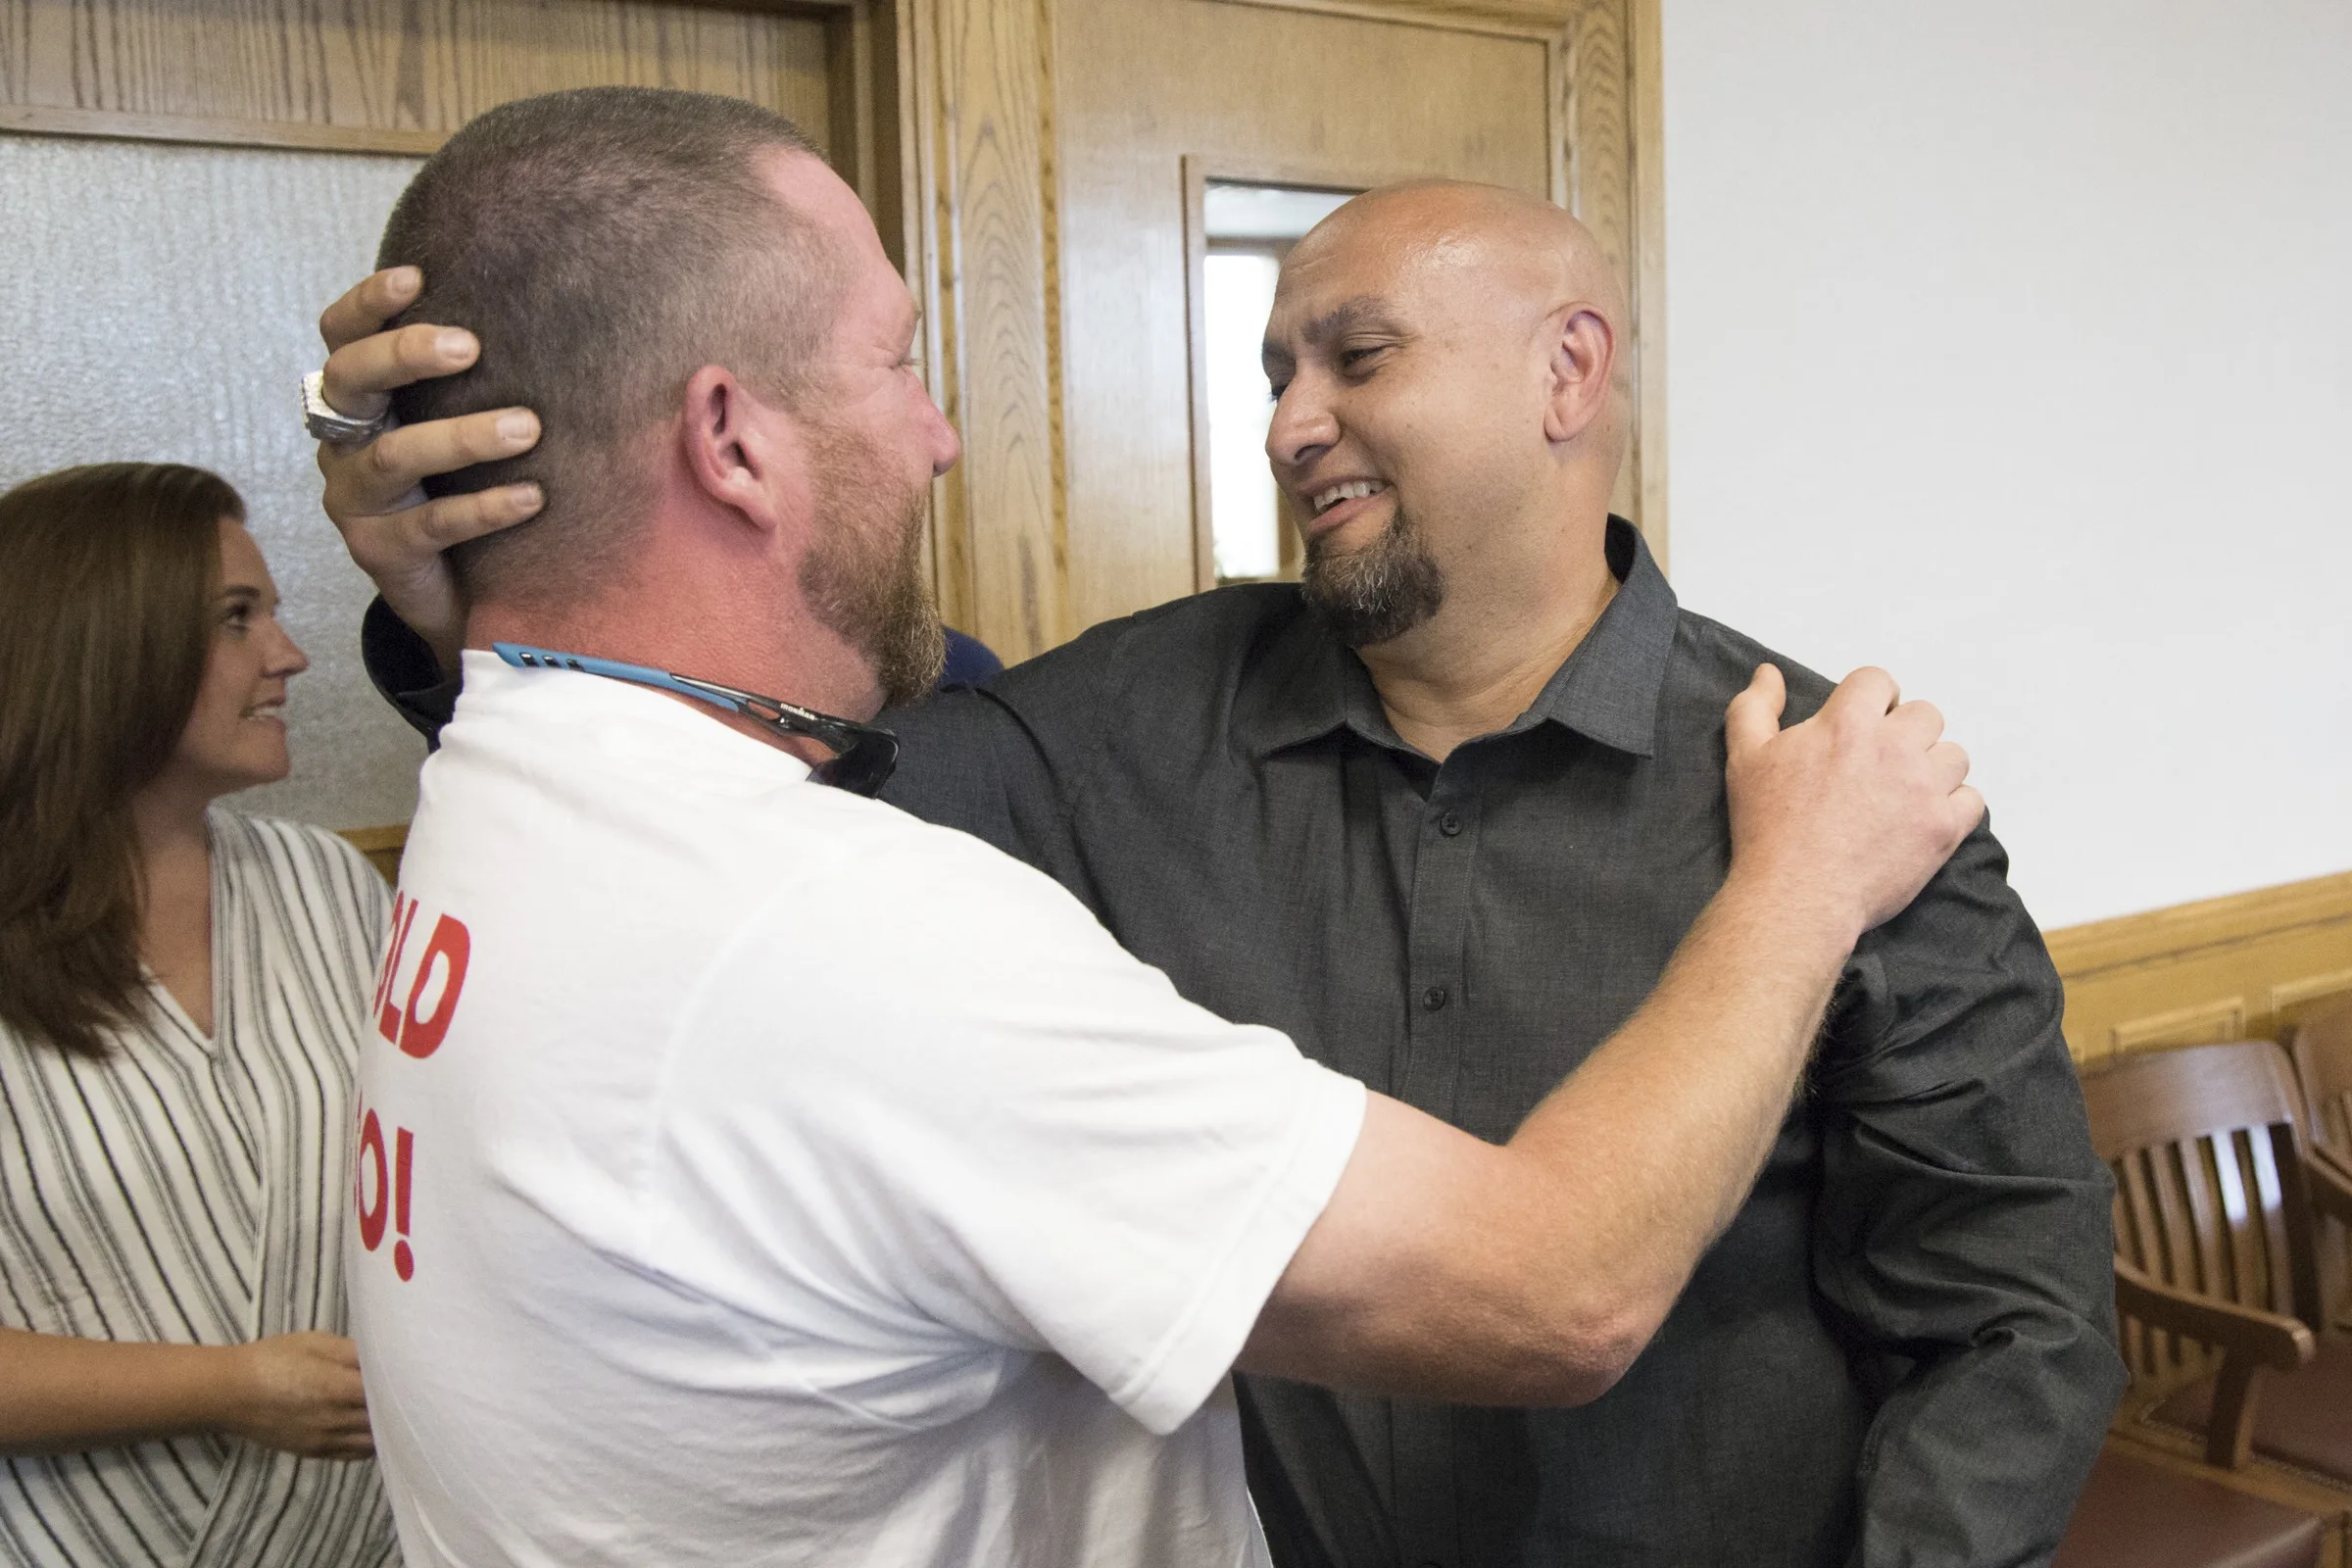 Christopher Tapp - Post Conviction Relief Proceedings on Wednesday, July 17, 2019 in Idaho Falls, Idaho. (Otto Kitsinger/AP Images for The Innocence Project)